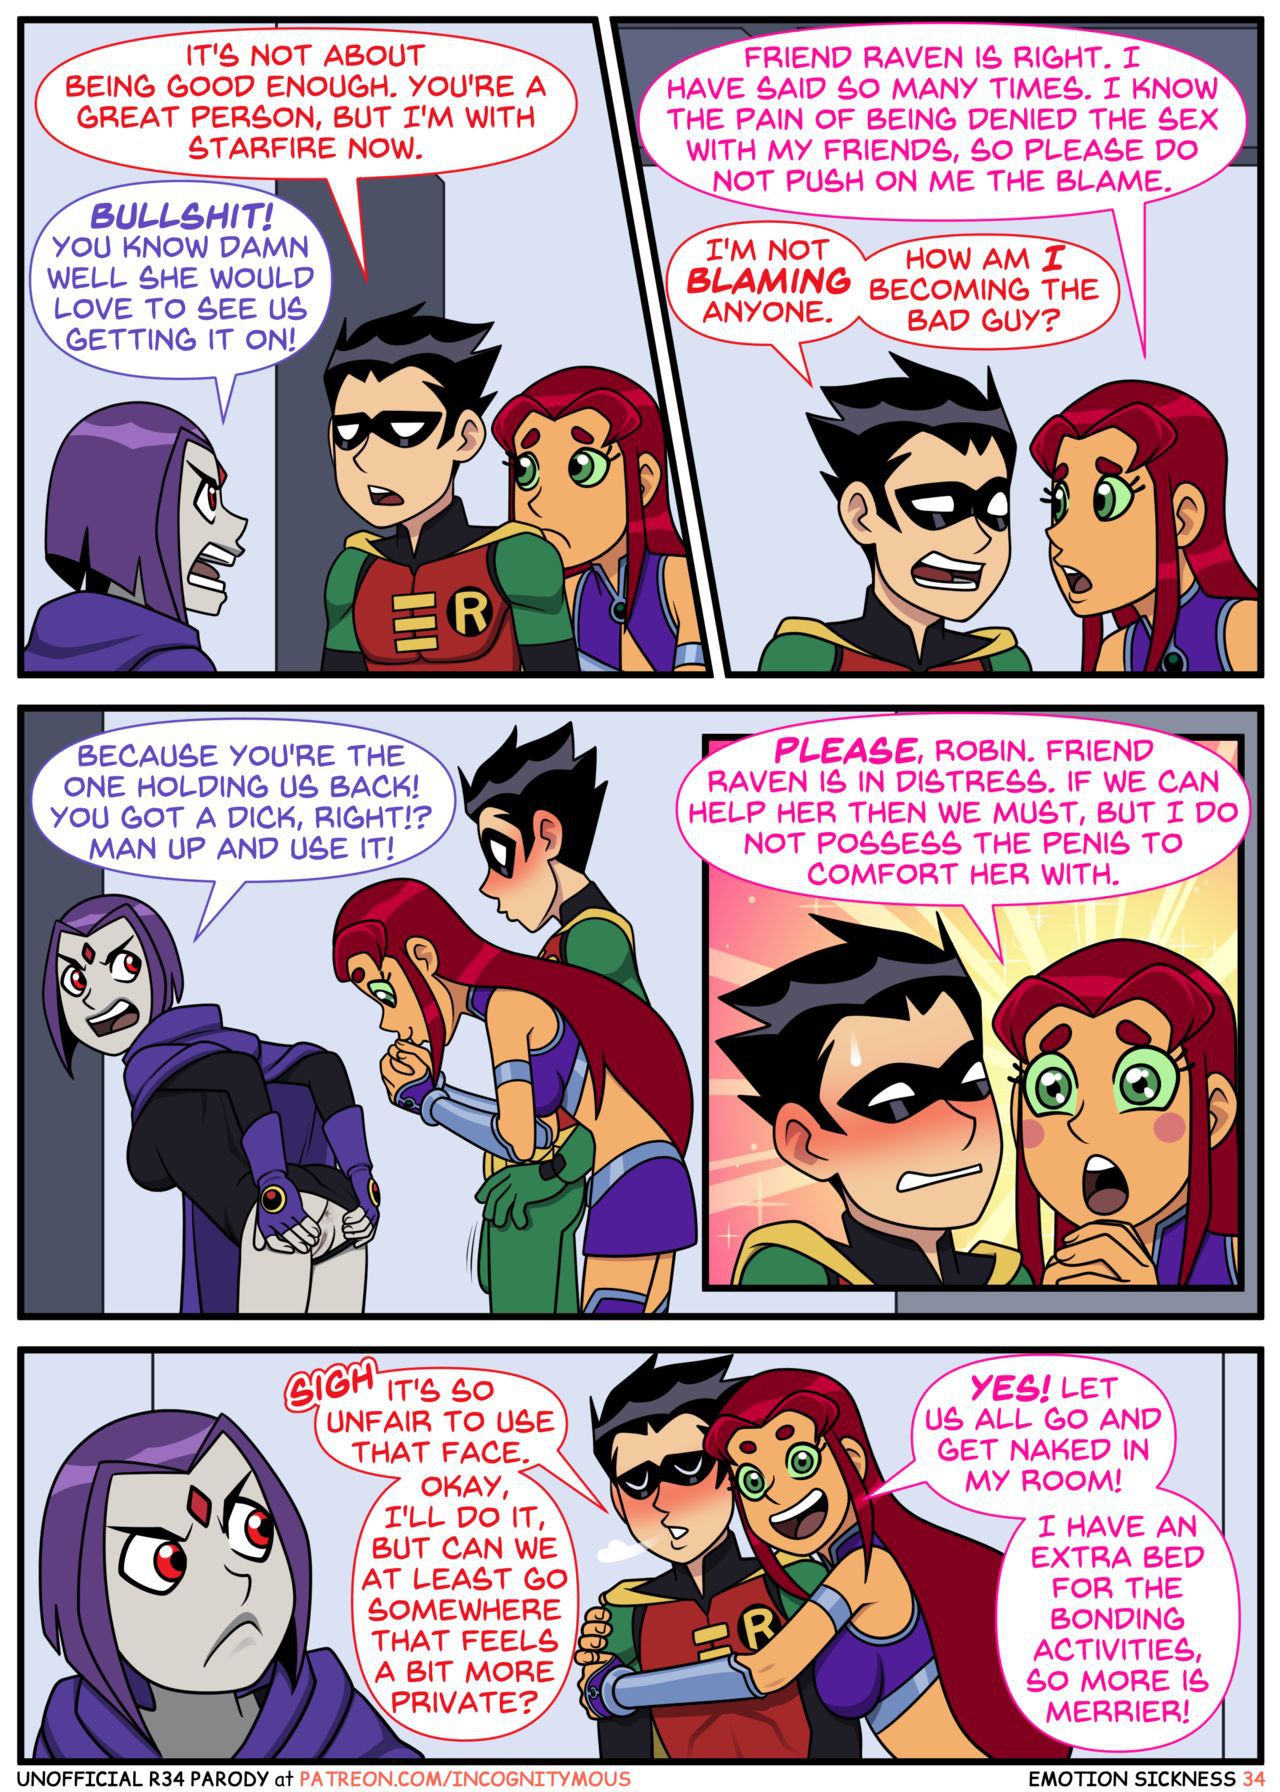 [Incognitymous] Emotion Sickness (Teen Titans) [Ongoing] 33